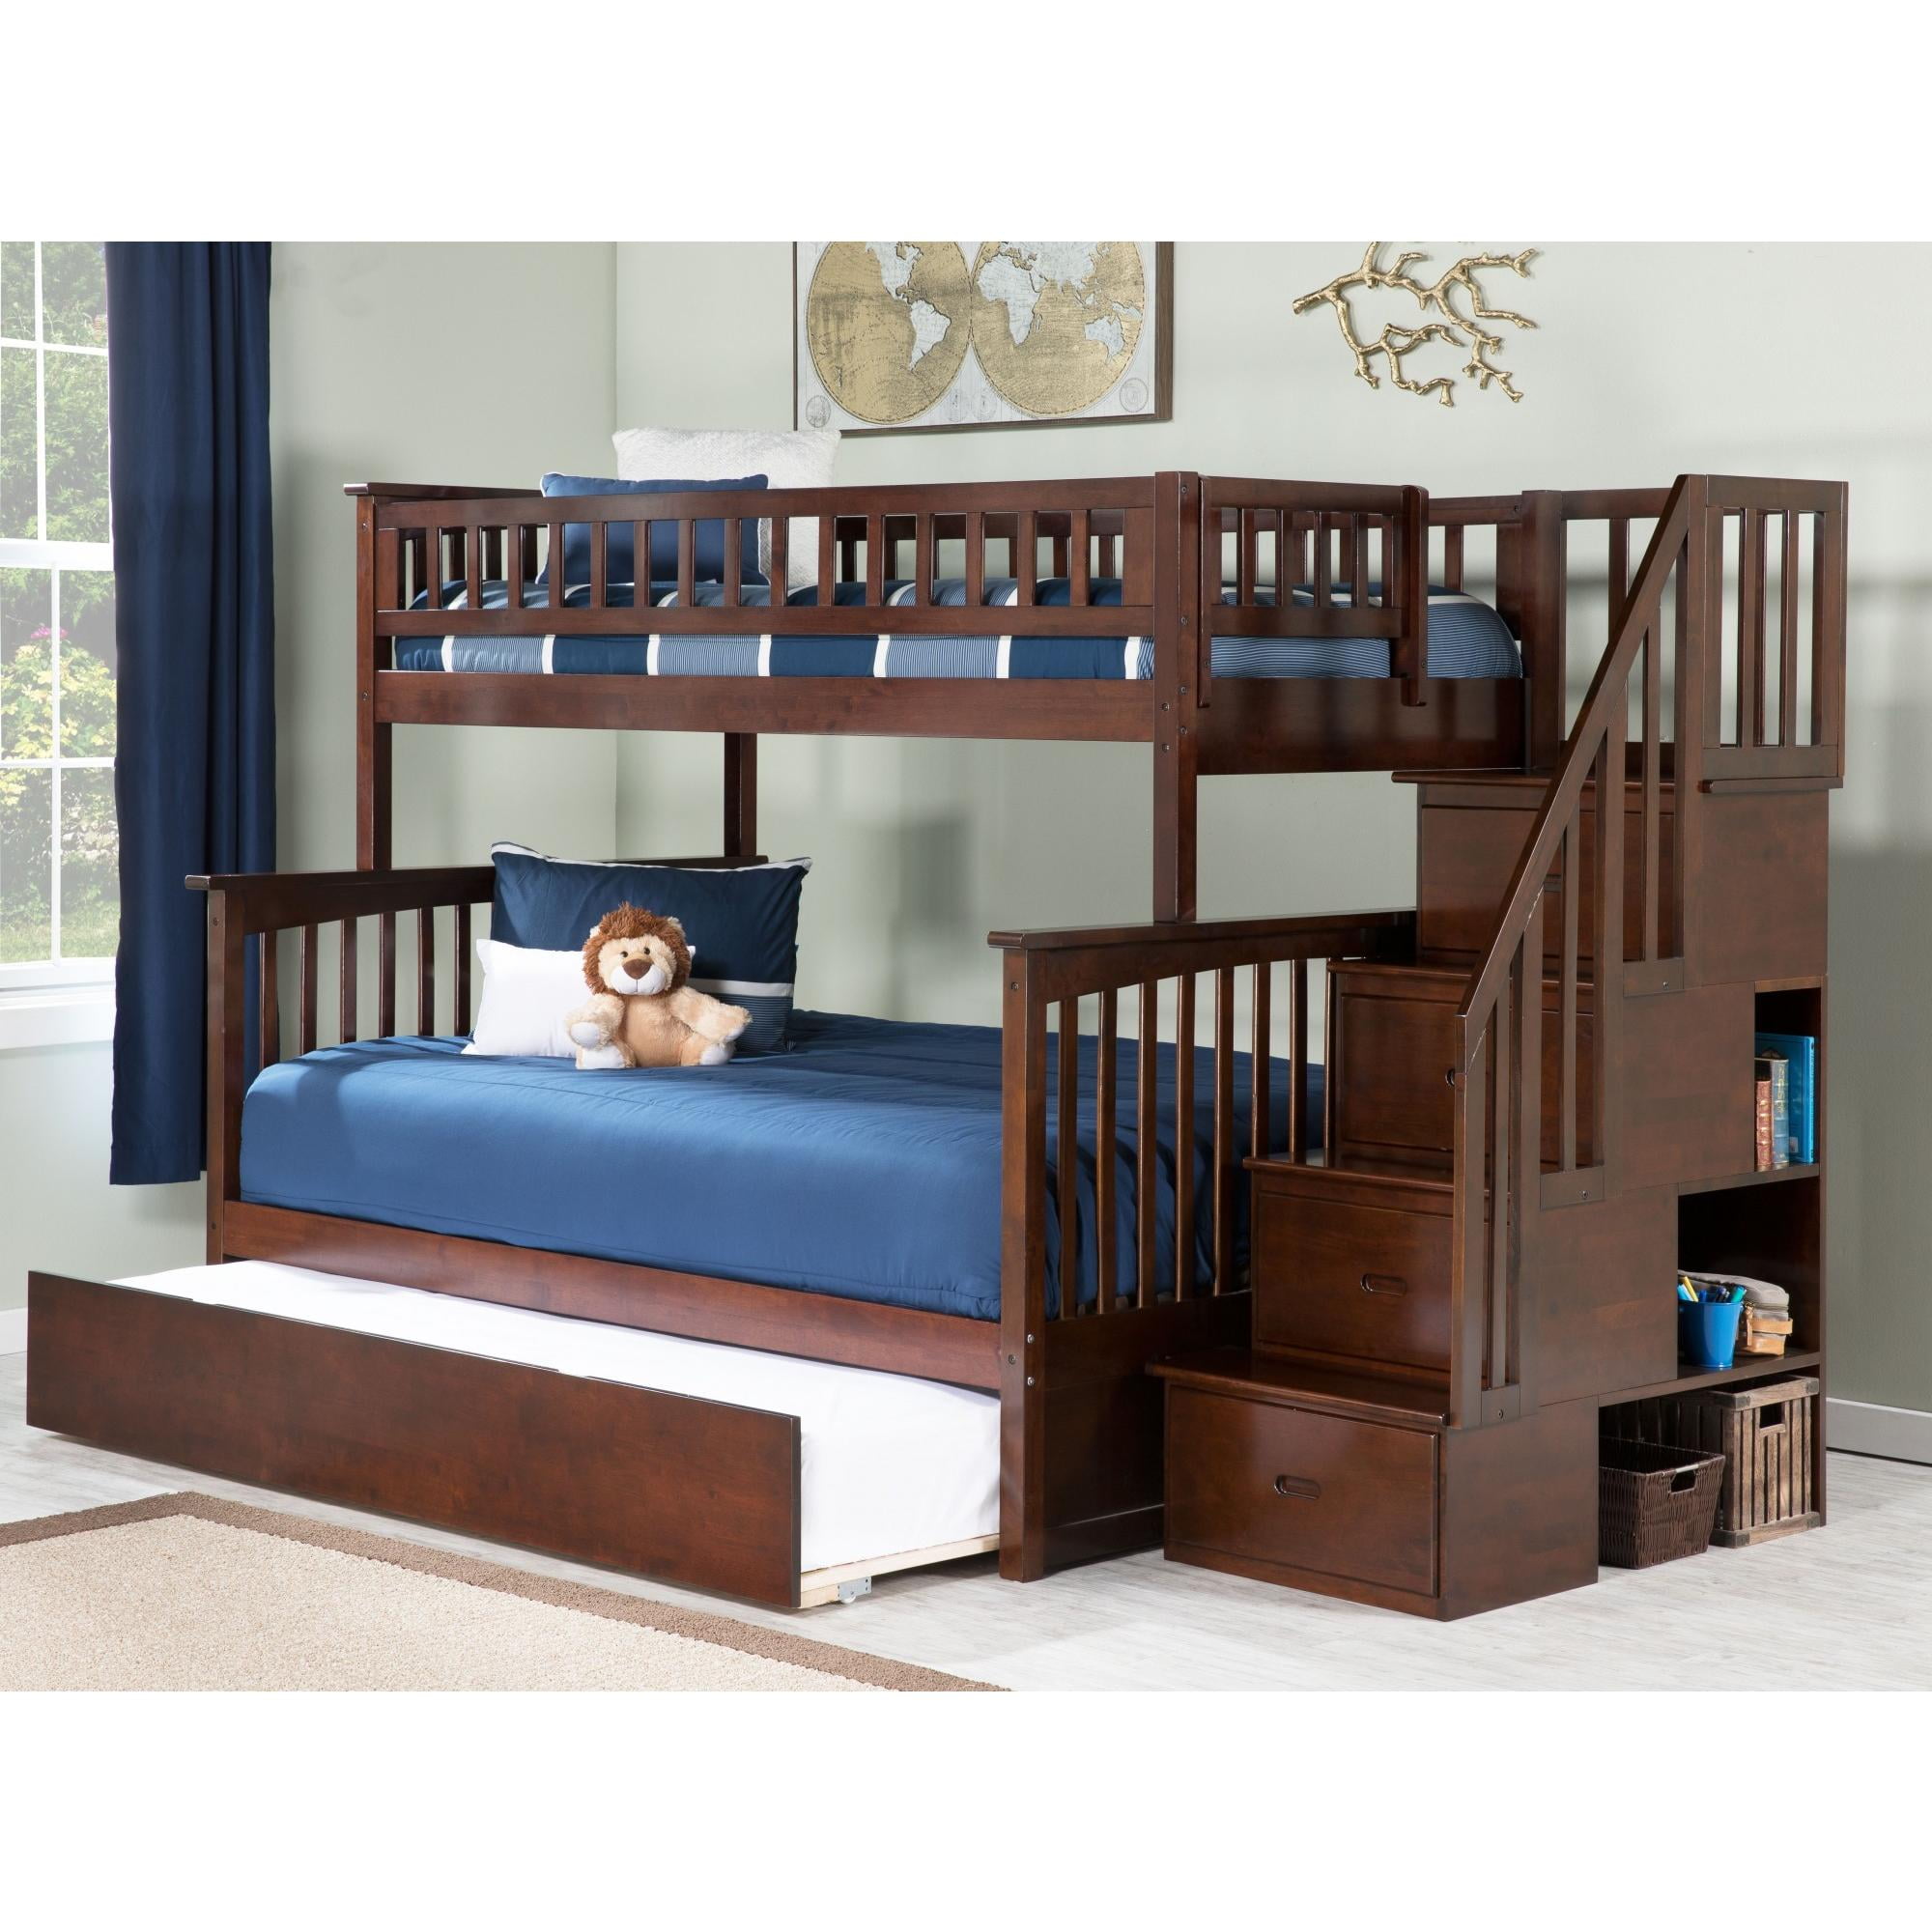 Columbia Staircase Bunk Bed Twin Over, How To Build Bunk Bed Stairs With Drawers